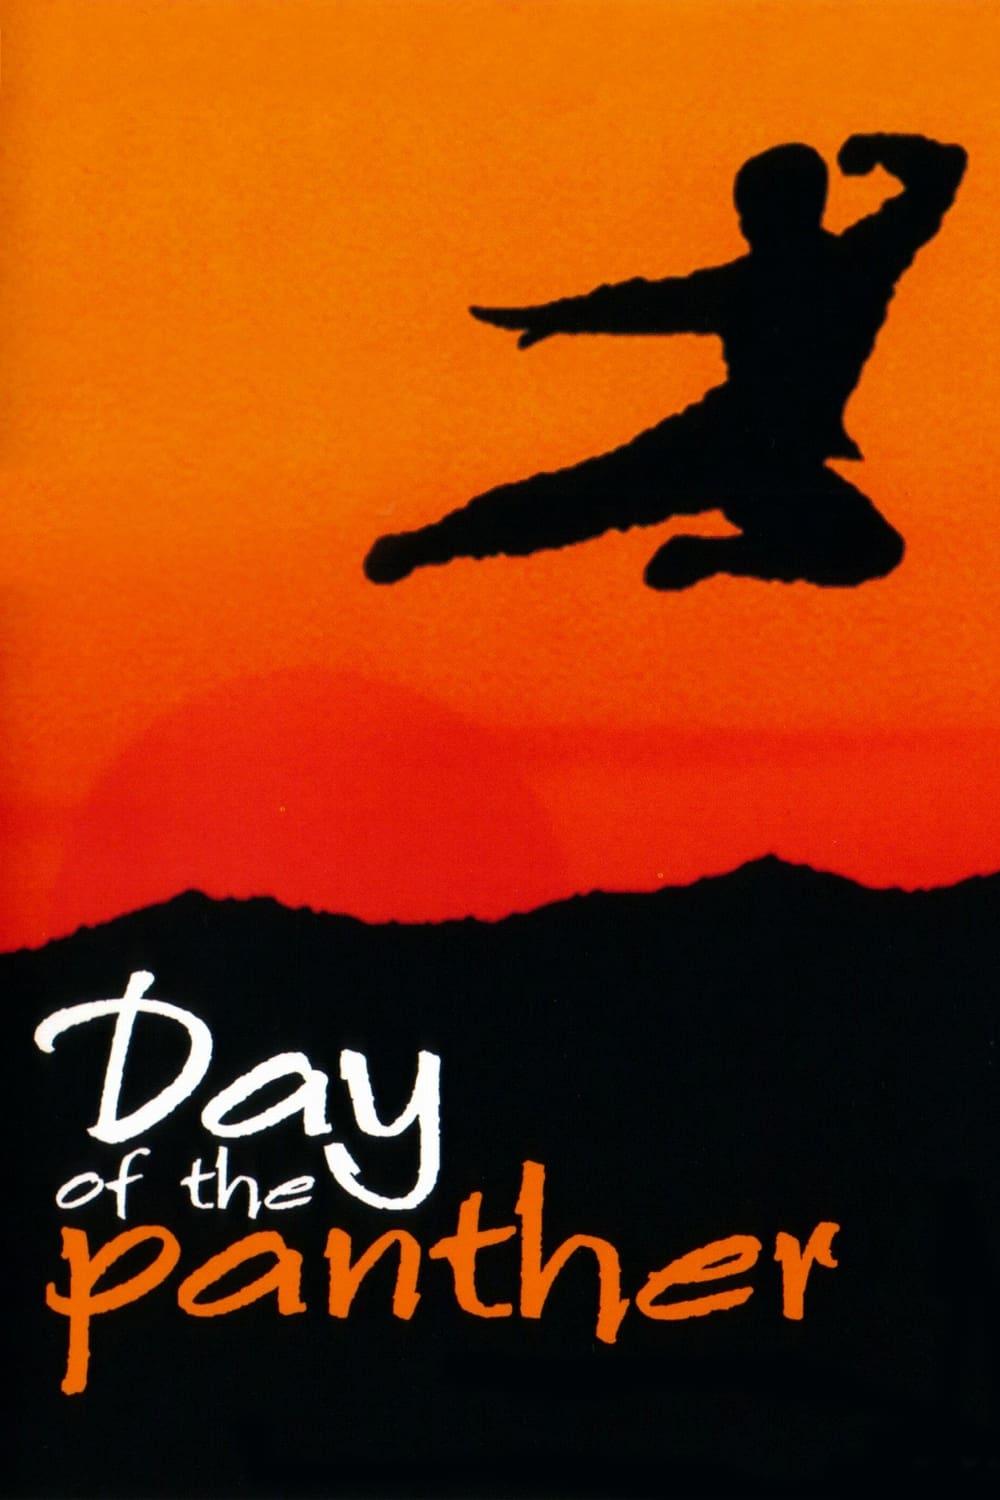 Day of the Panther poster